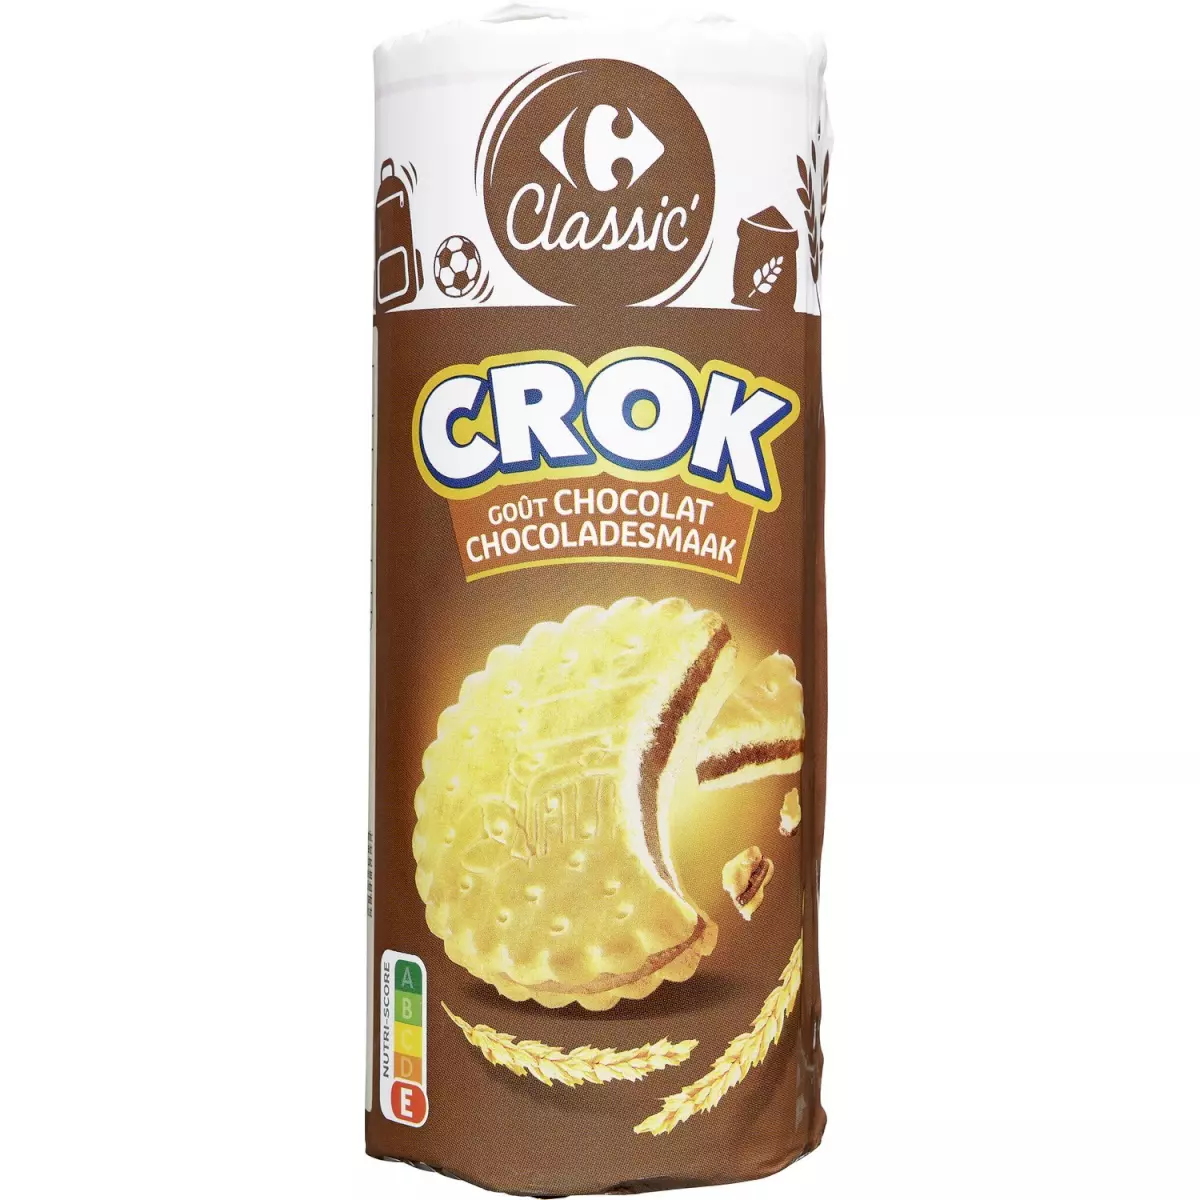 GOUTER FOURRE ROND CHOCOLAT PQ 300 GR CARREFOUR